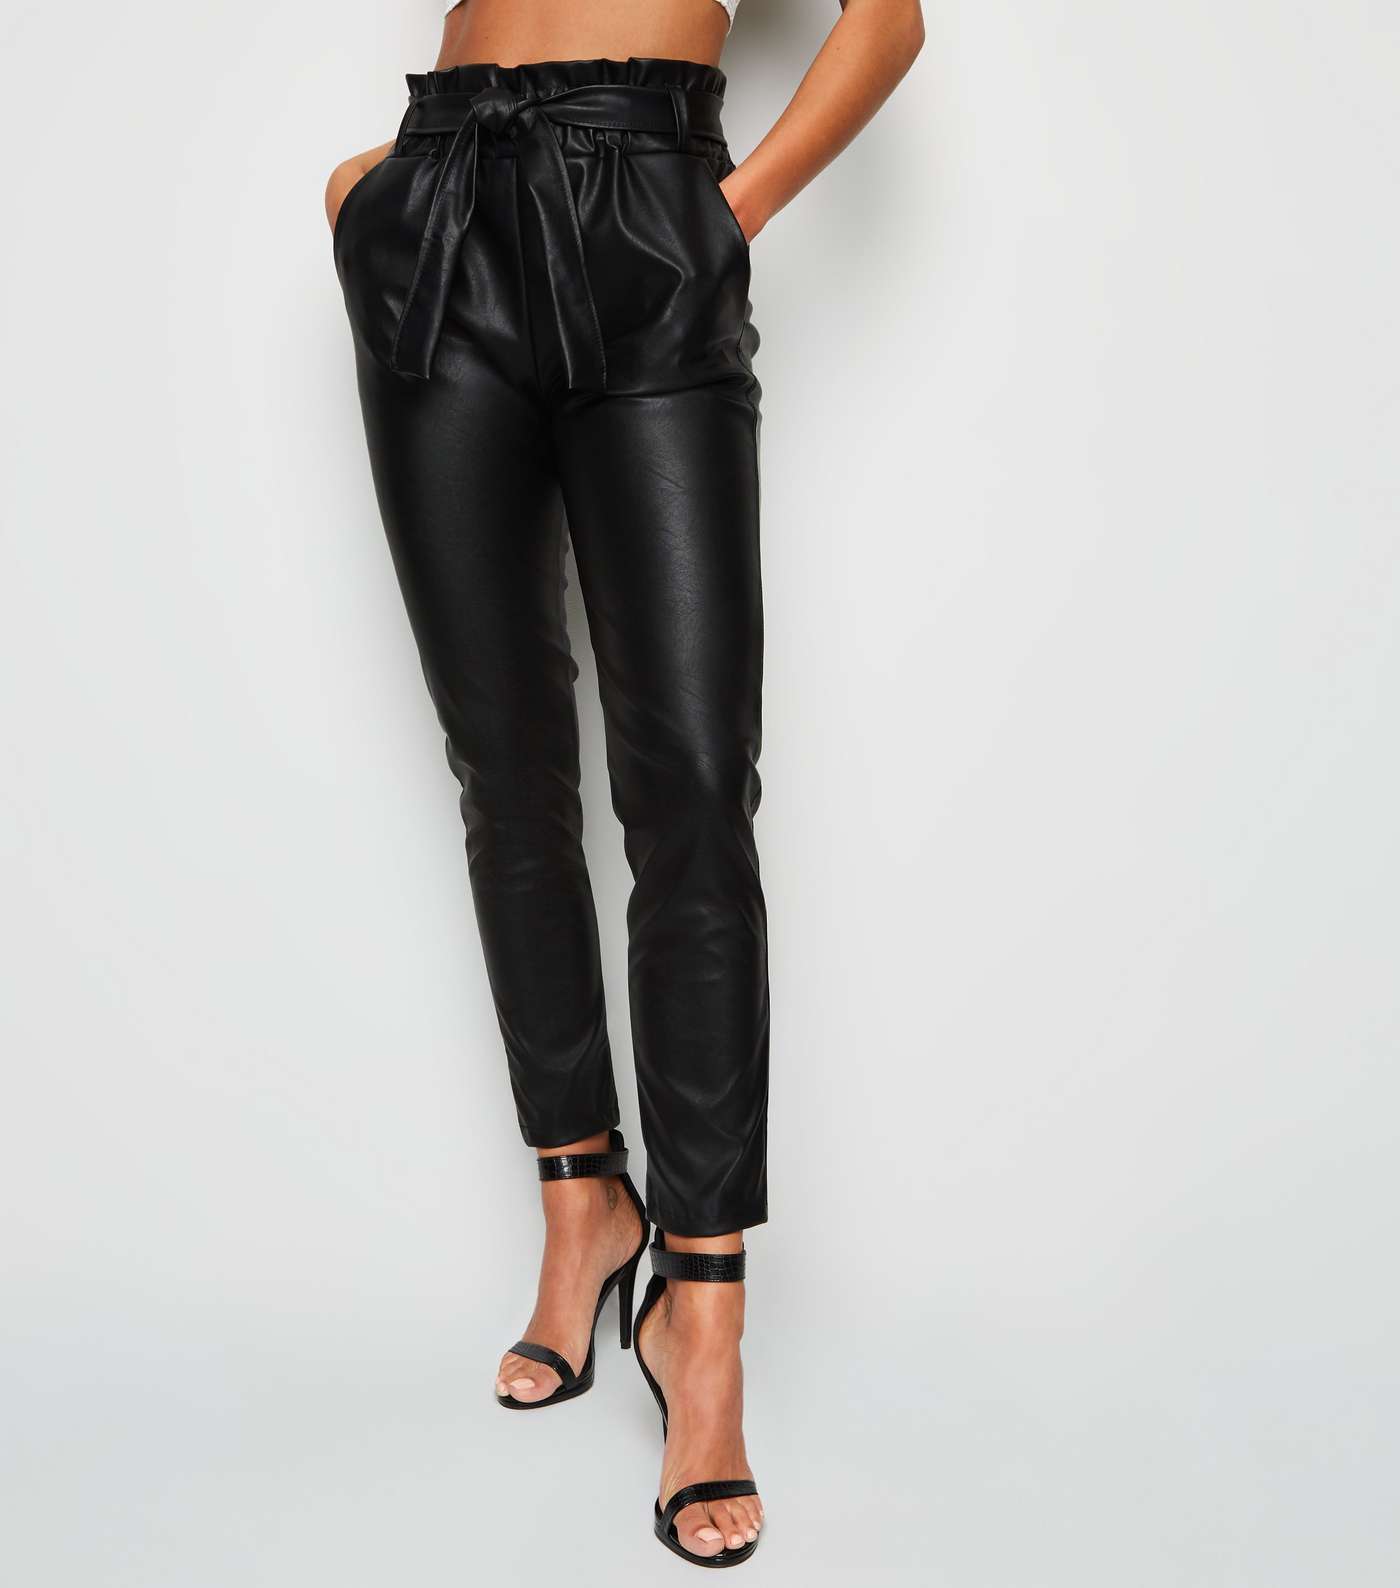 Cameo Rose Black Leather-Look High Waist Trousers Image 2